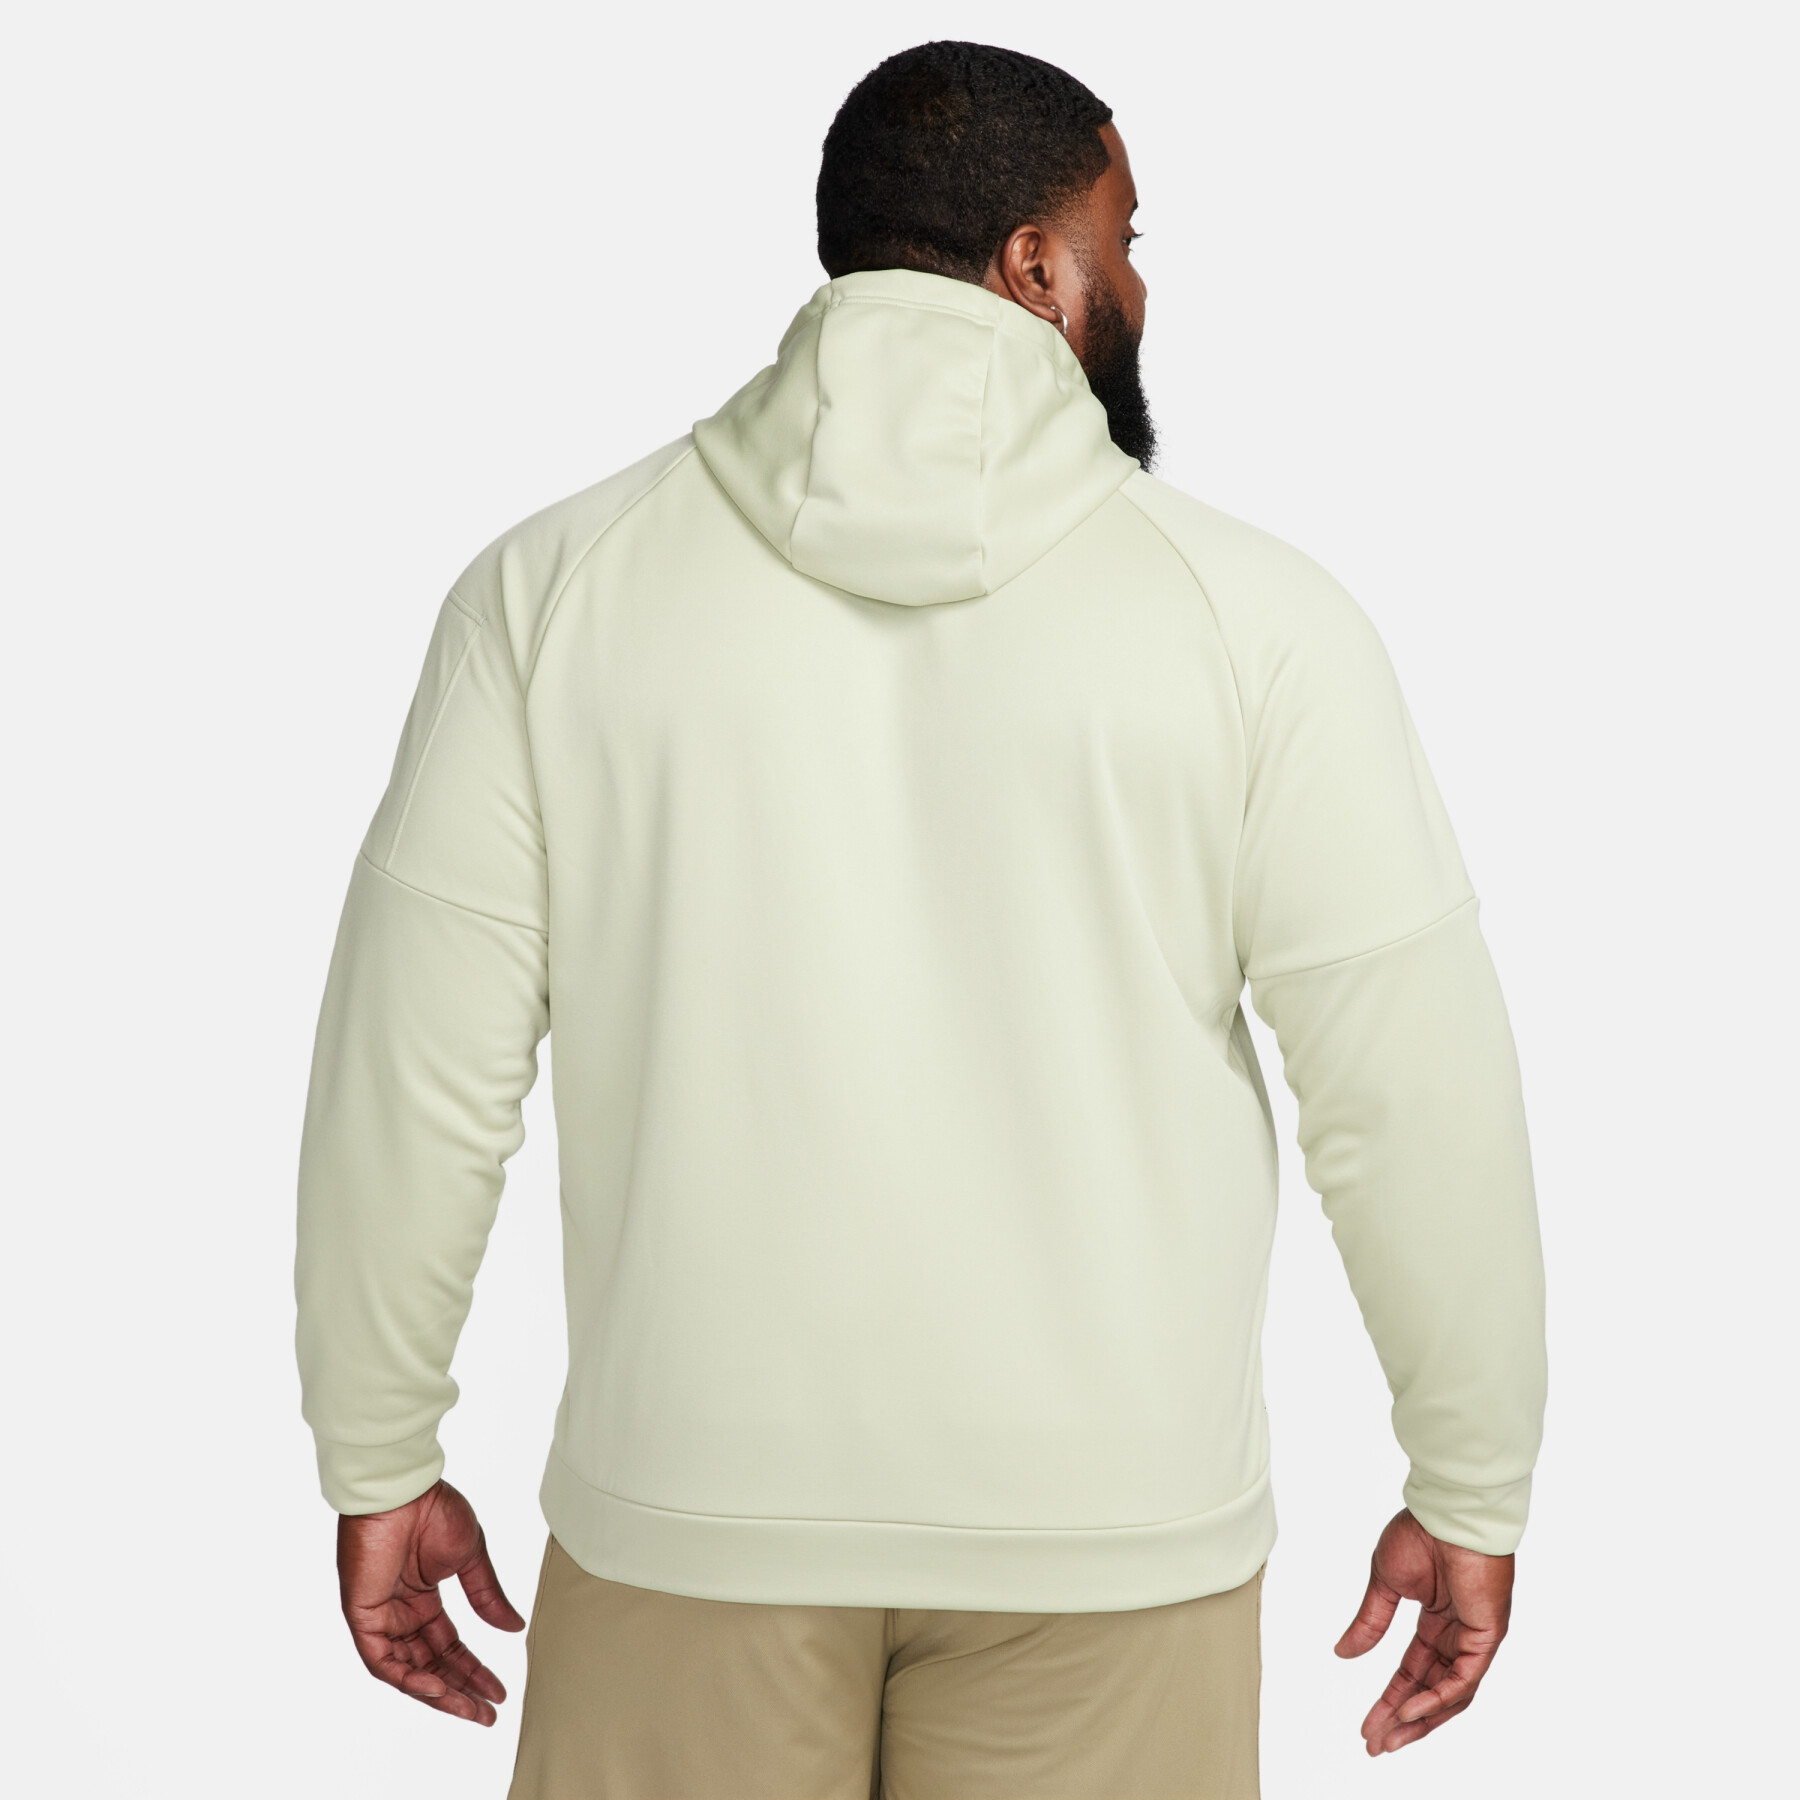 Hooded training top Nike Therma-FIT